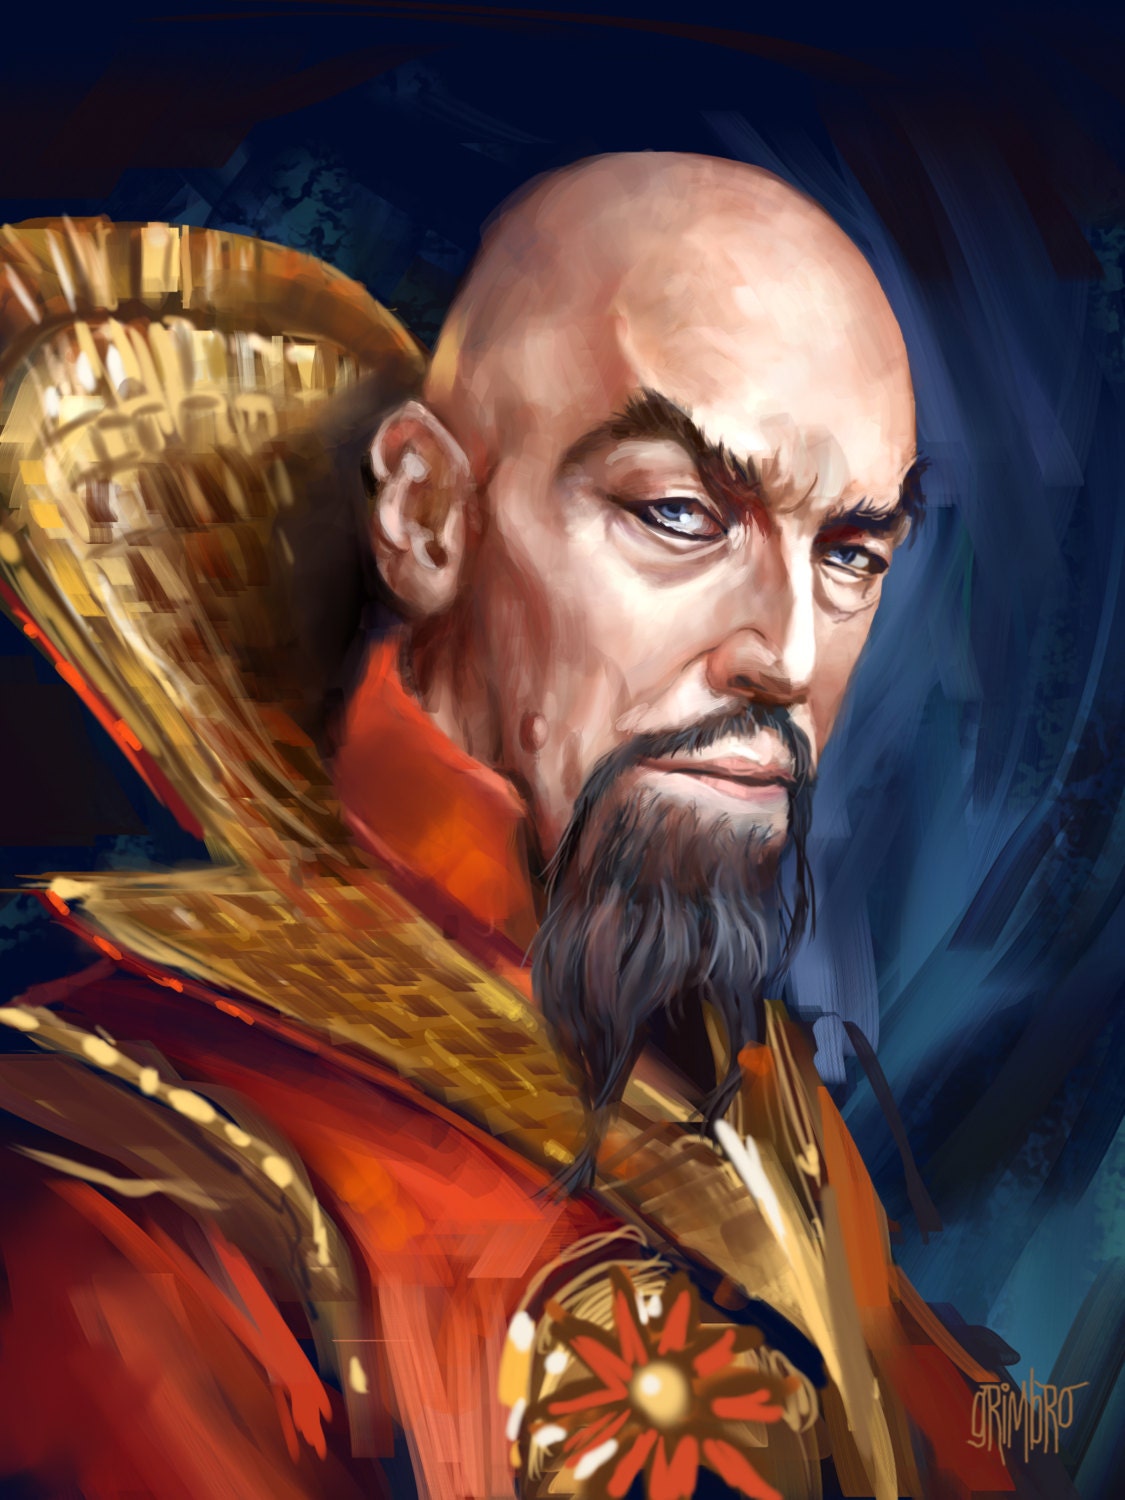 Ming the Merciless CANVAS PRINT by Grimbro on Etsy